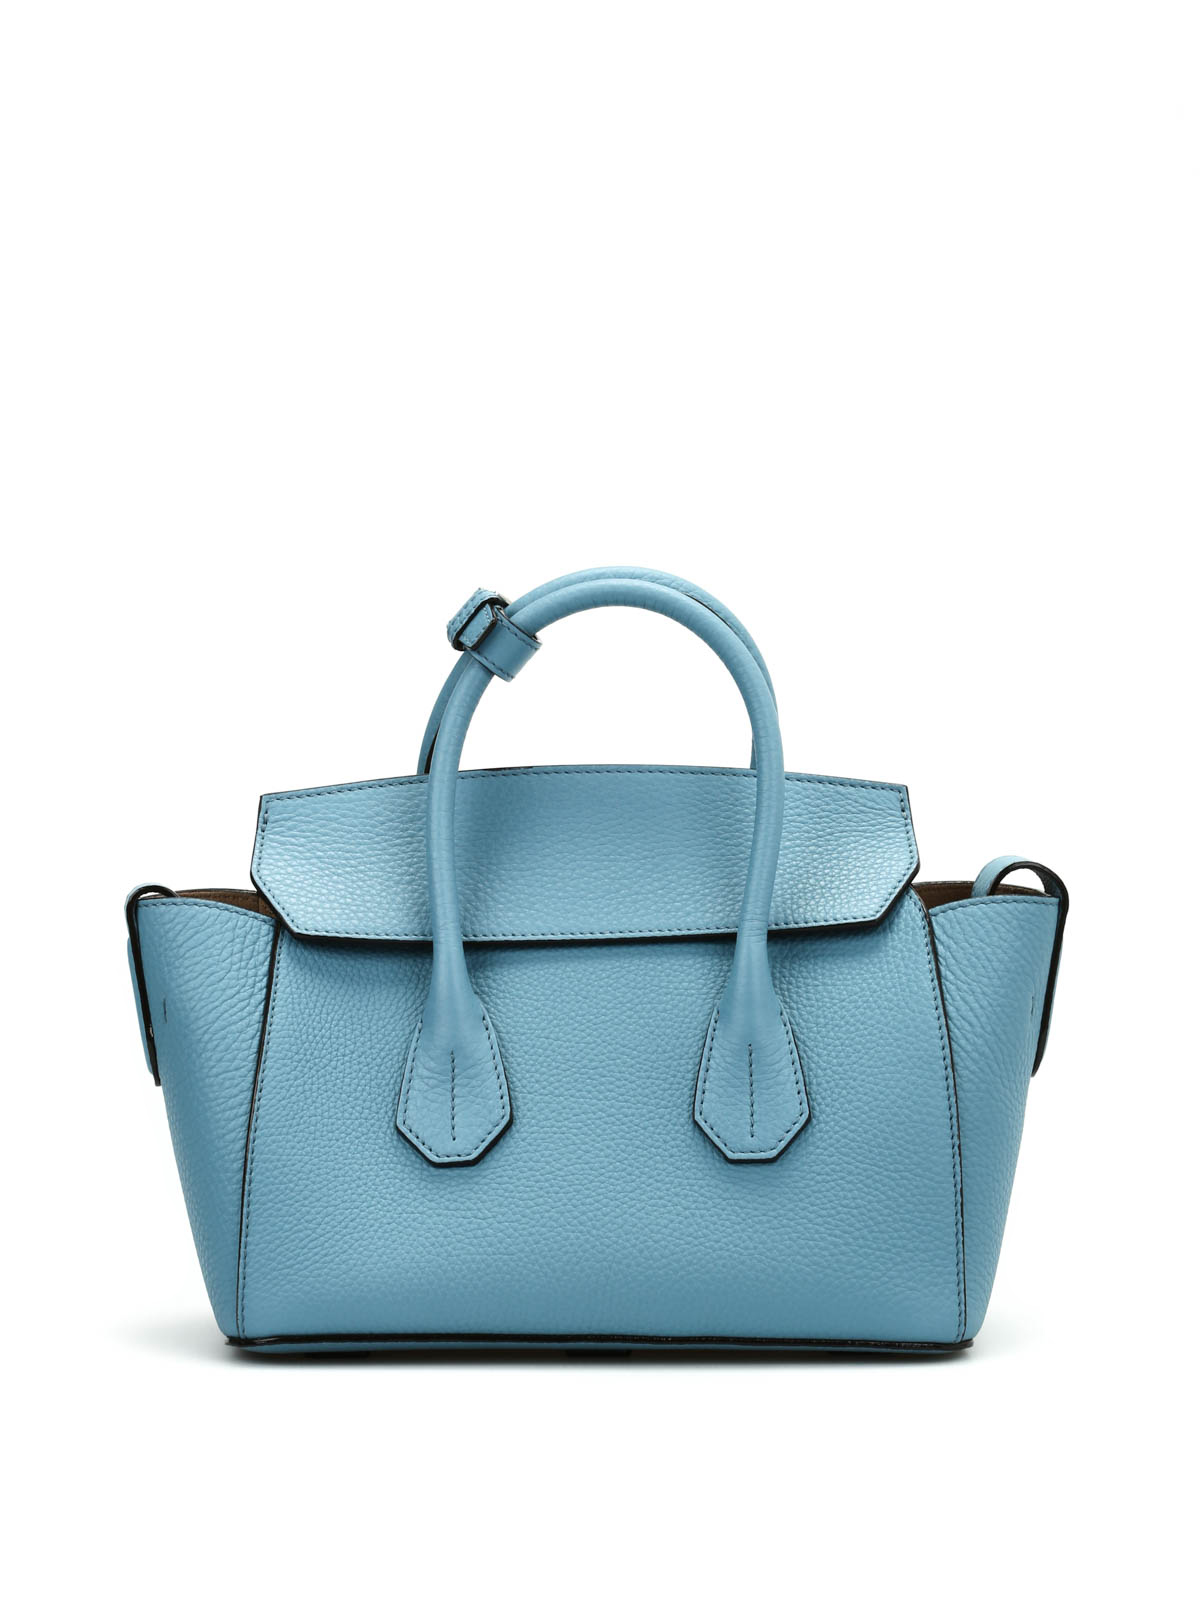 Totes bags Bally - Sommet Small leather tote - 6204330 | iKRIX.com